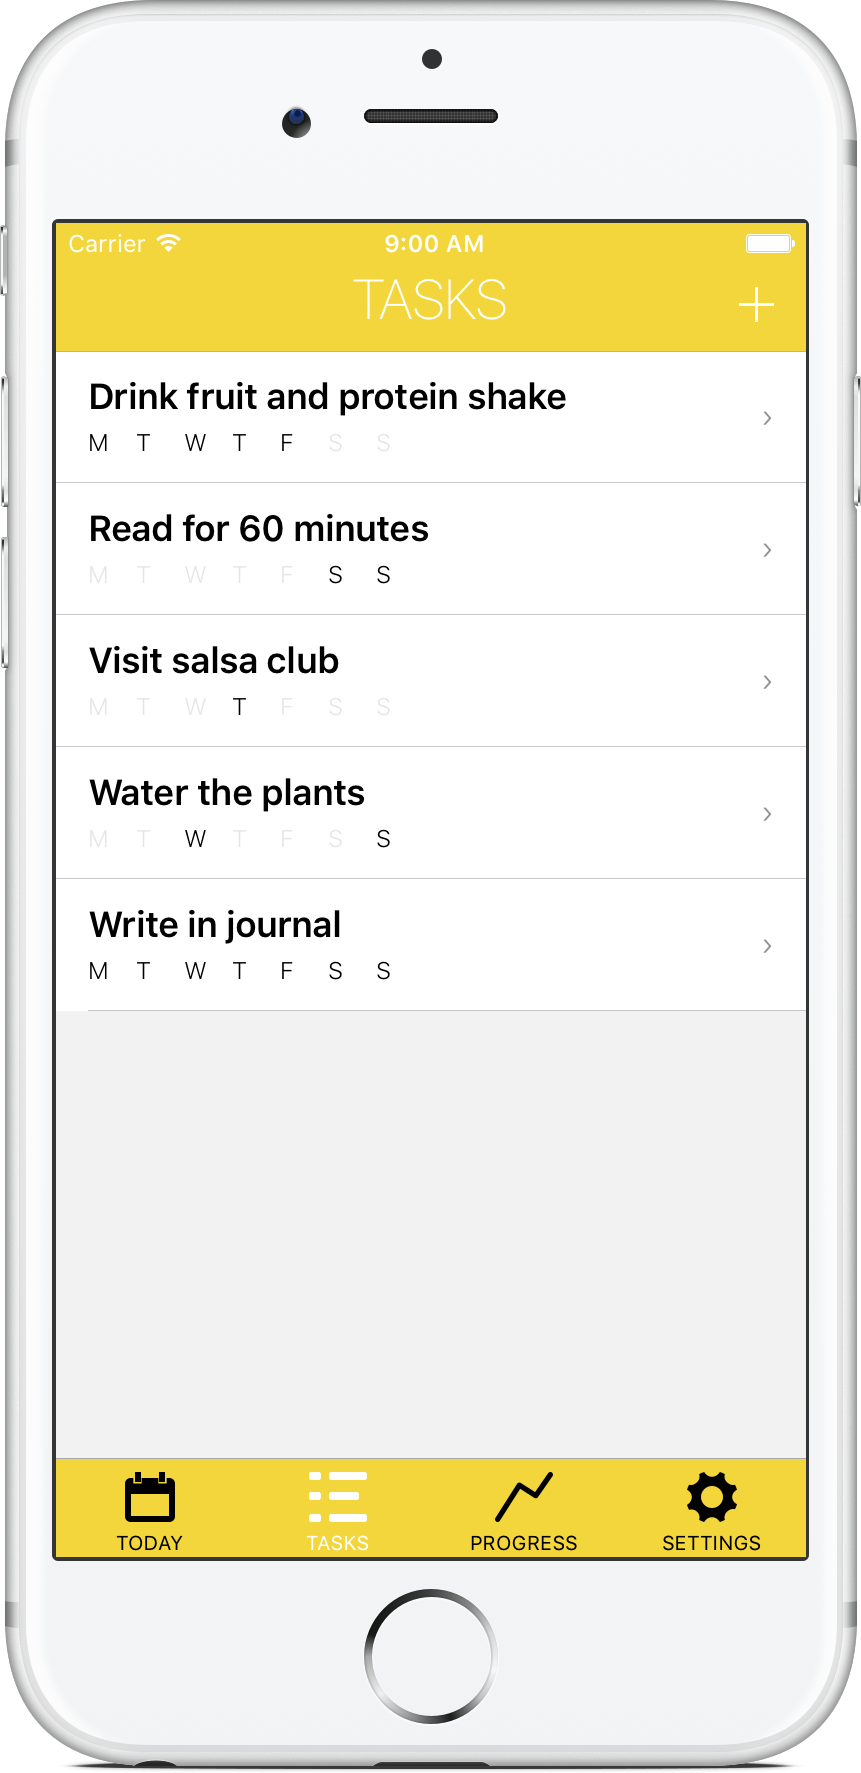 iPhone showing a list of tasks and which days they are assigned to.